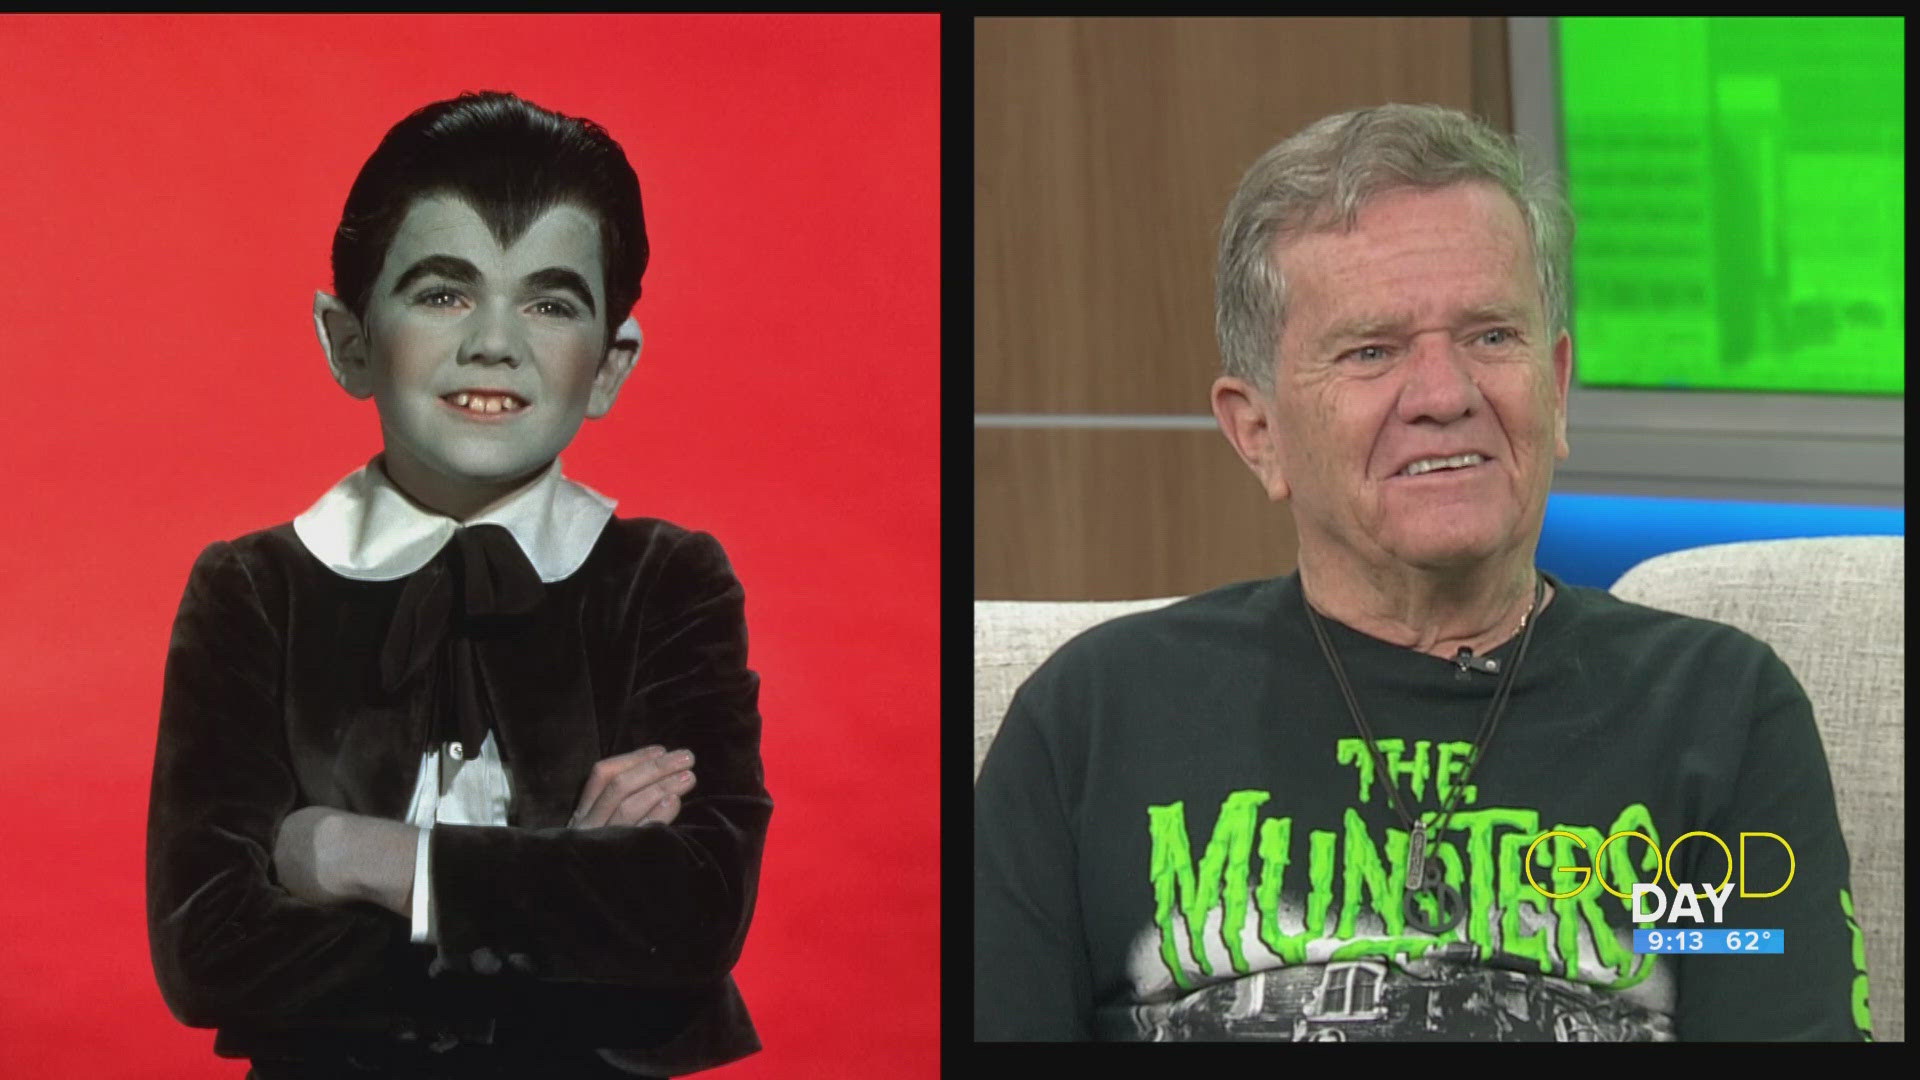 Actor Butch Patrick, who played Eddie Munster, and Rod Saunders of Field of Dreams Drive-In, talks this unique event and throwback.